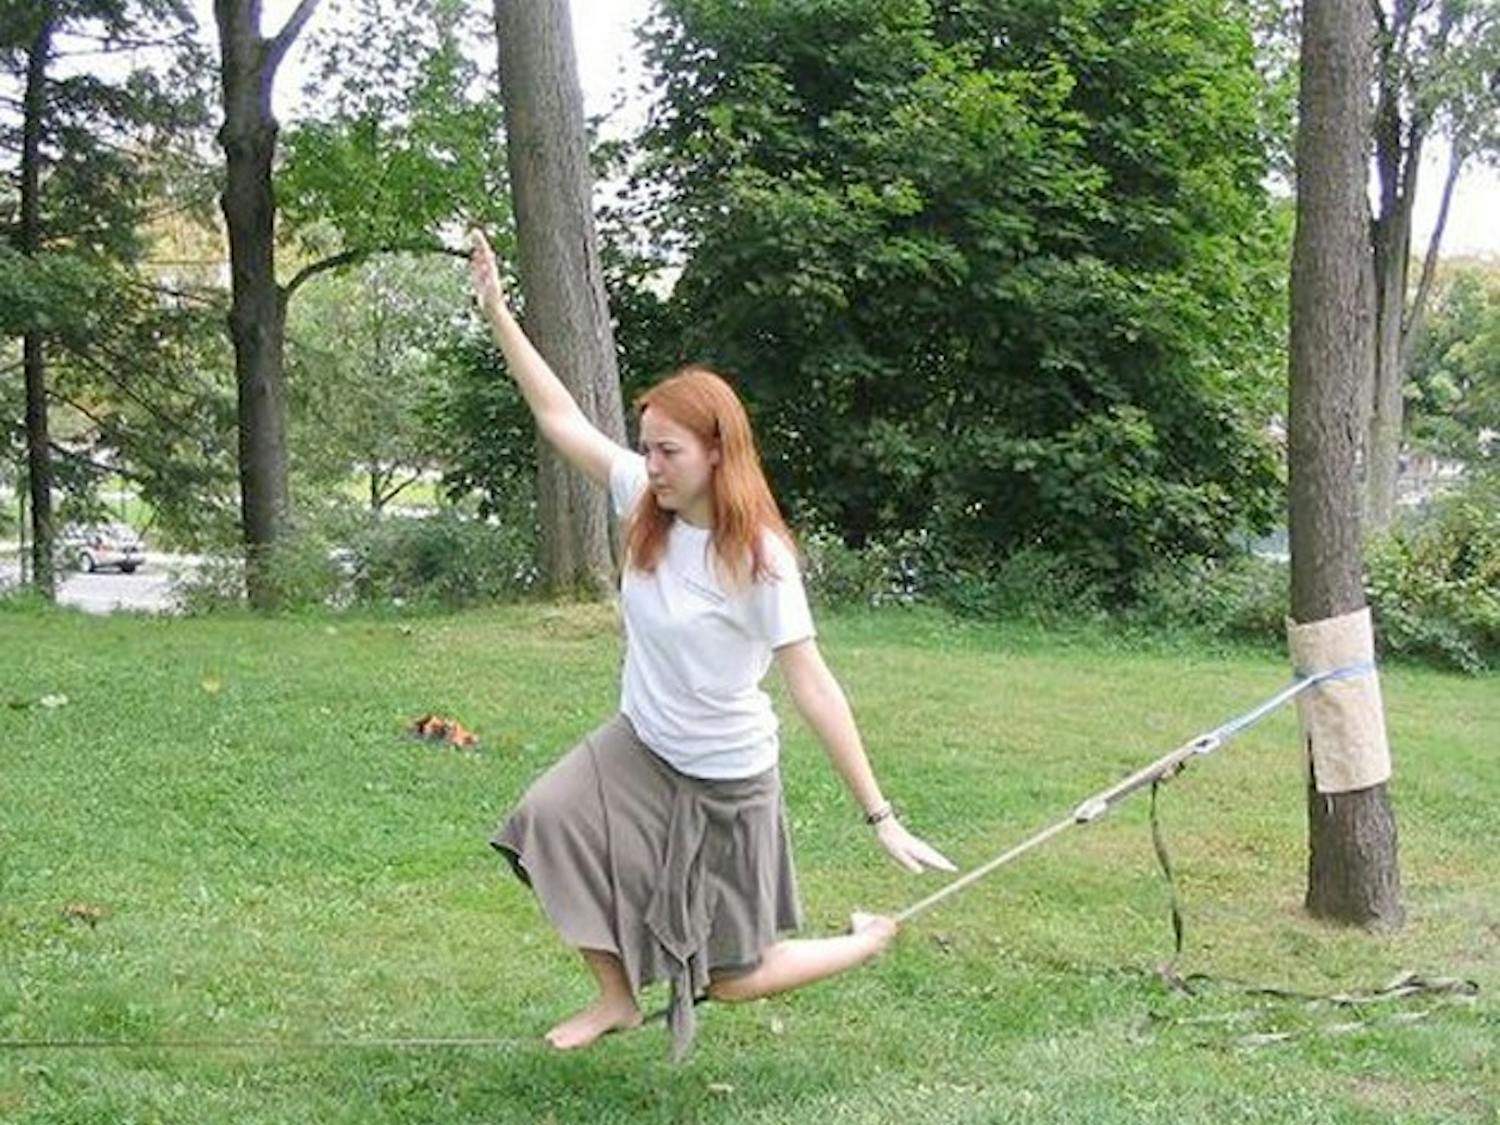 Meghan Mella GR'11 is one of the two graduate students at Dartmouth who can be seen practicing the unique sport of slacklining around the campus.